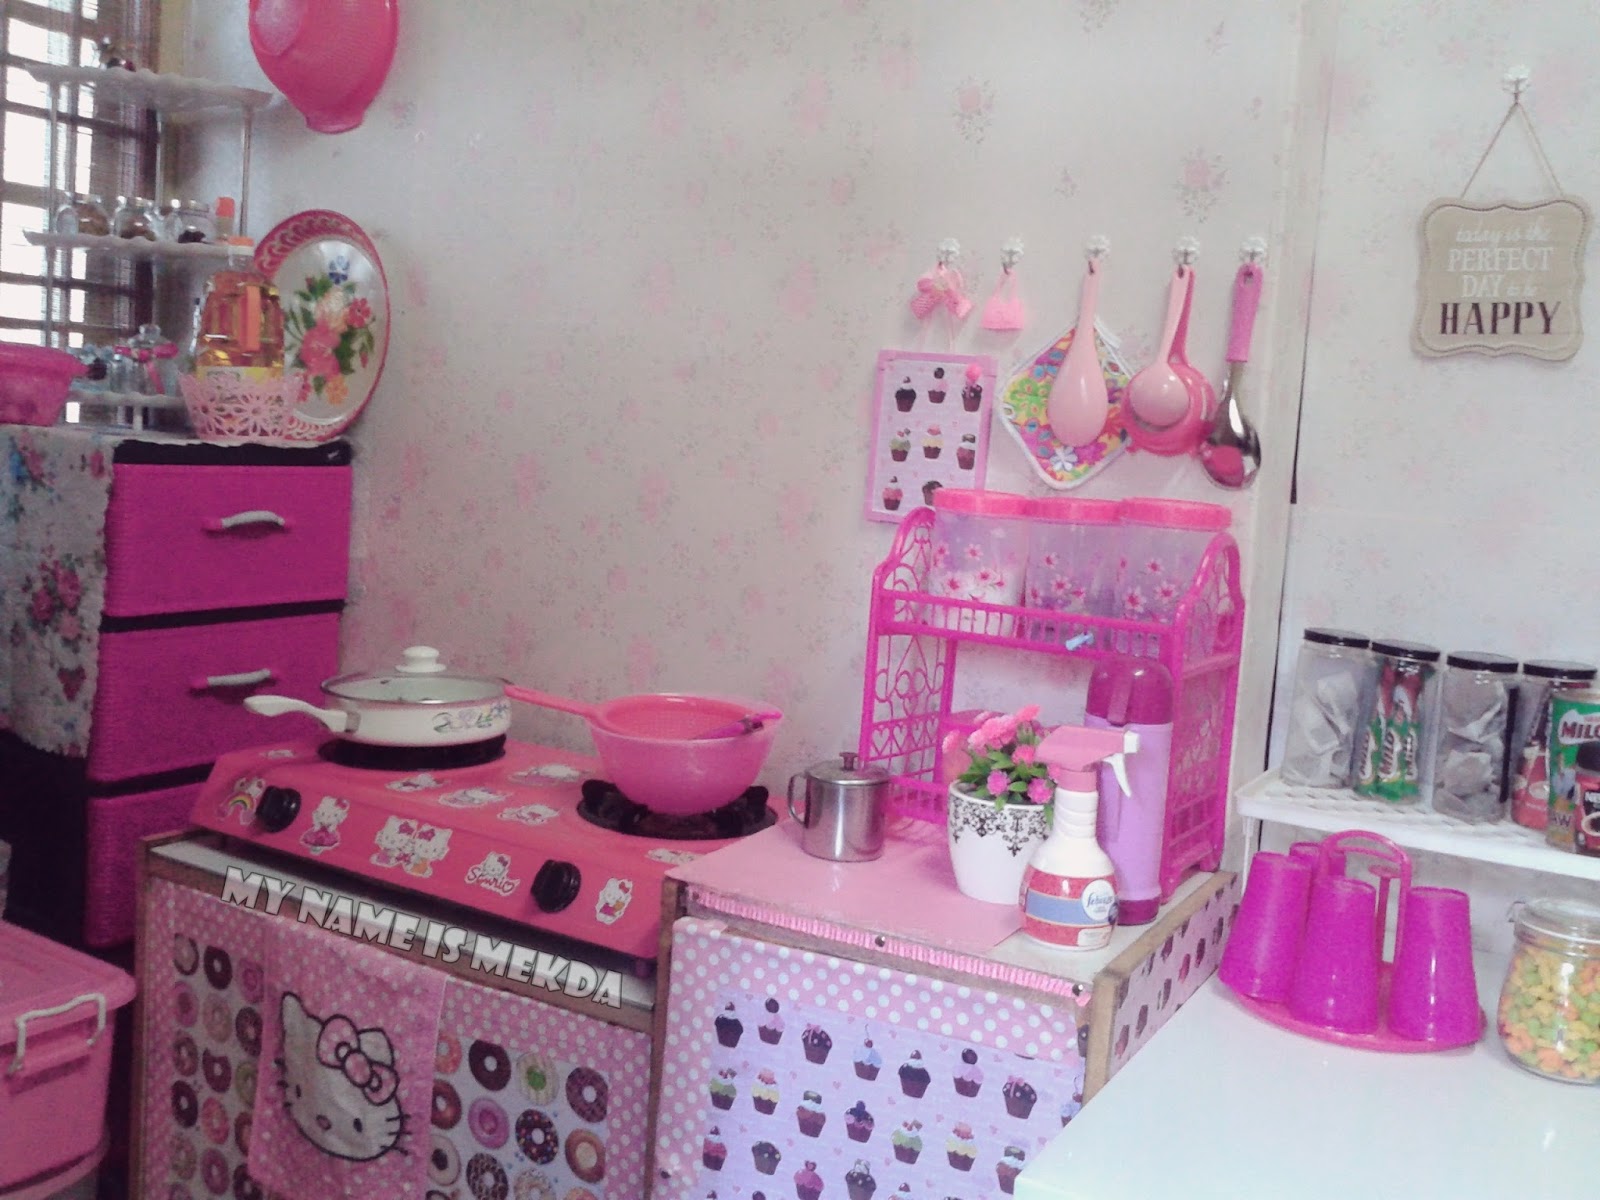 wallpaper mr diy,pink,product,room,toy,material property